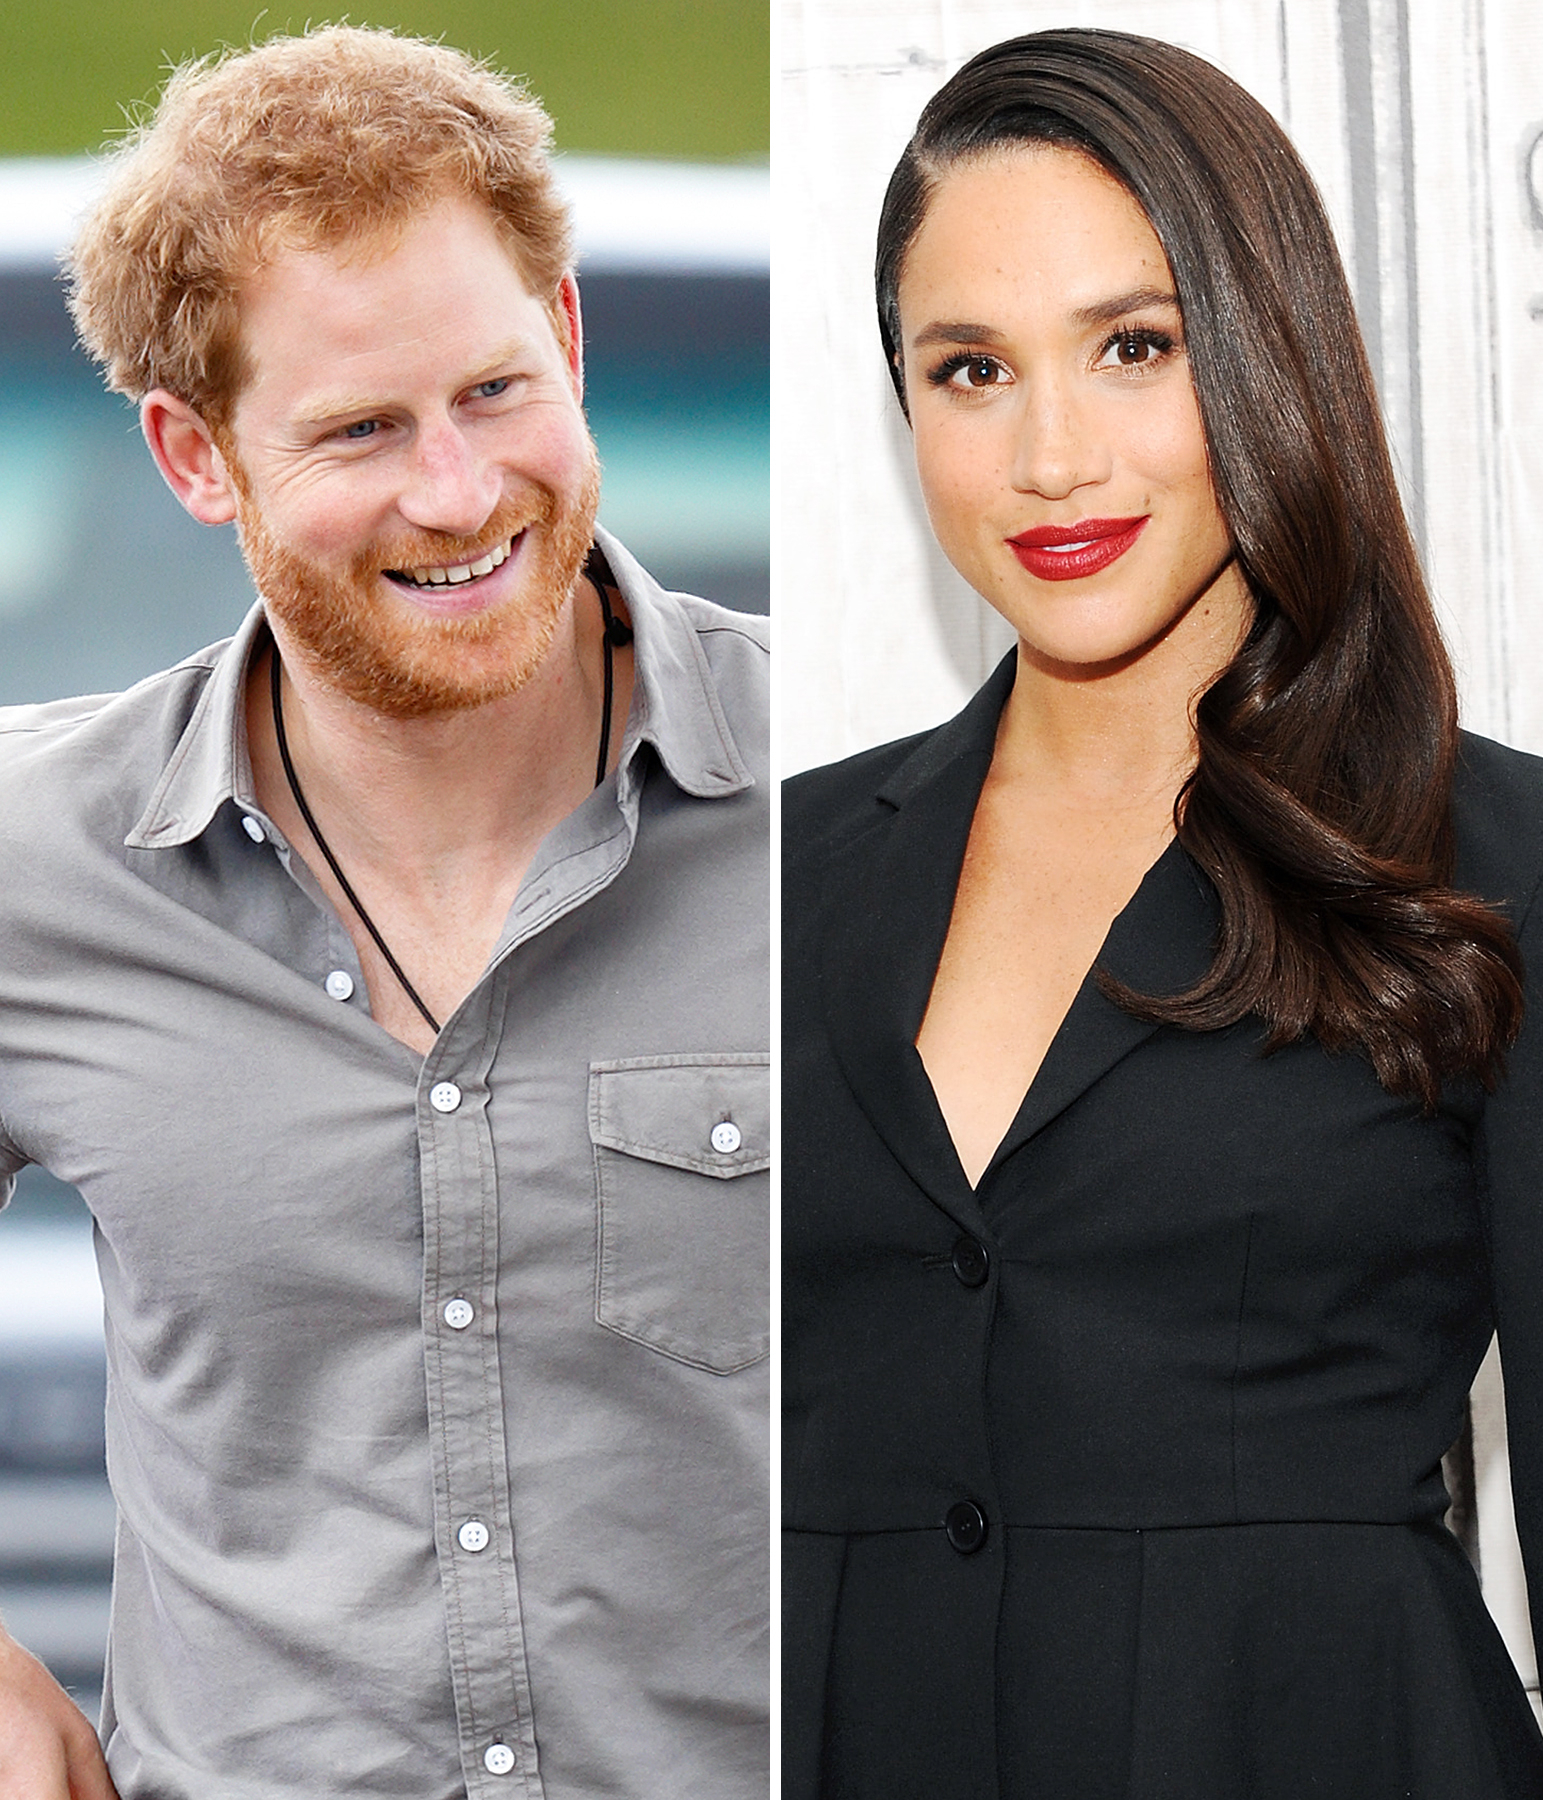 Prince Harry S Theater Date With Meghan Markle Details